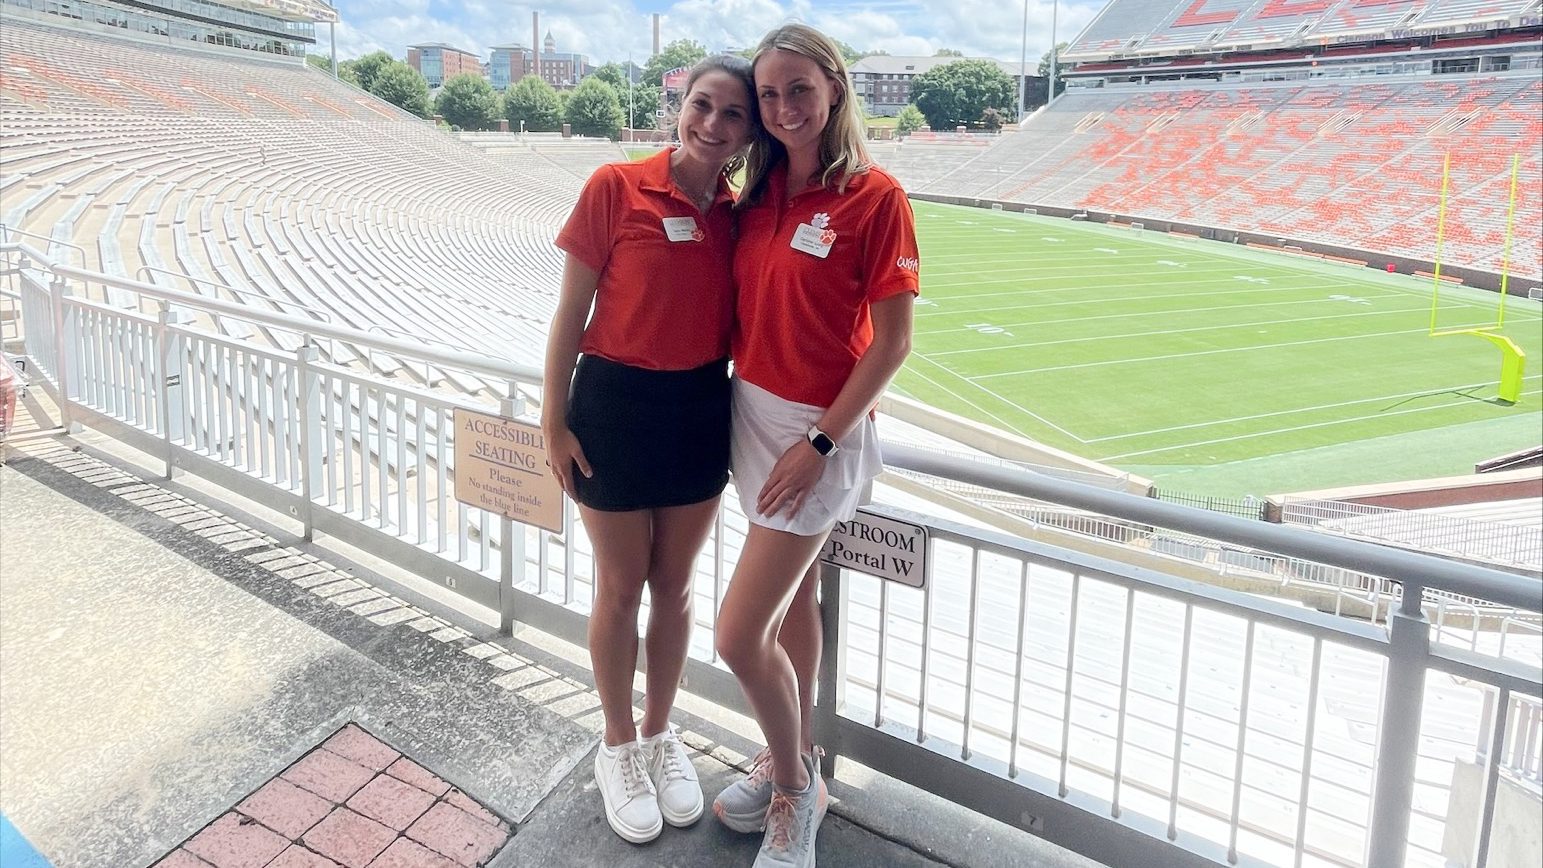 Caroline Long and Samantha Moody, co-recruitment chairs for Clemson University Guide Association in 2021-22